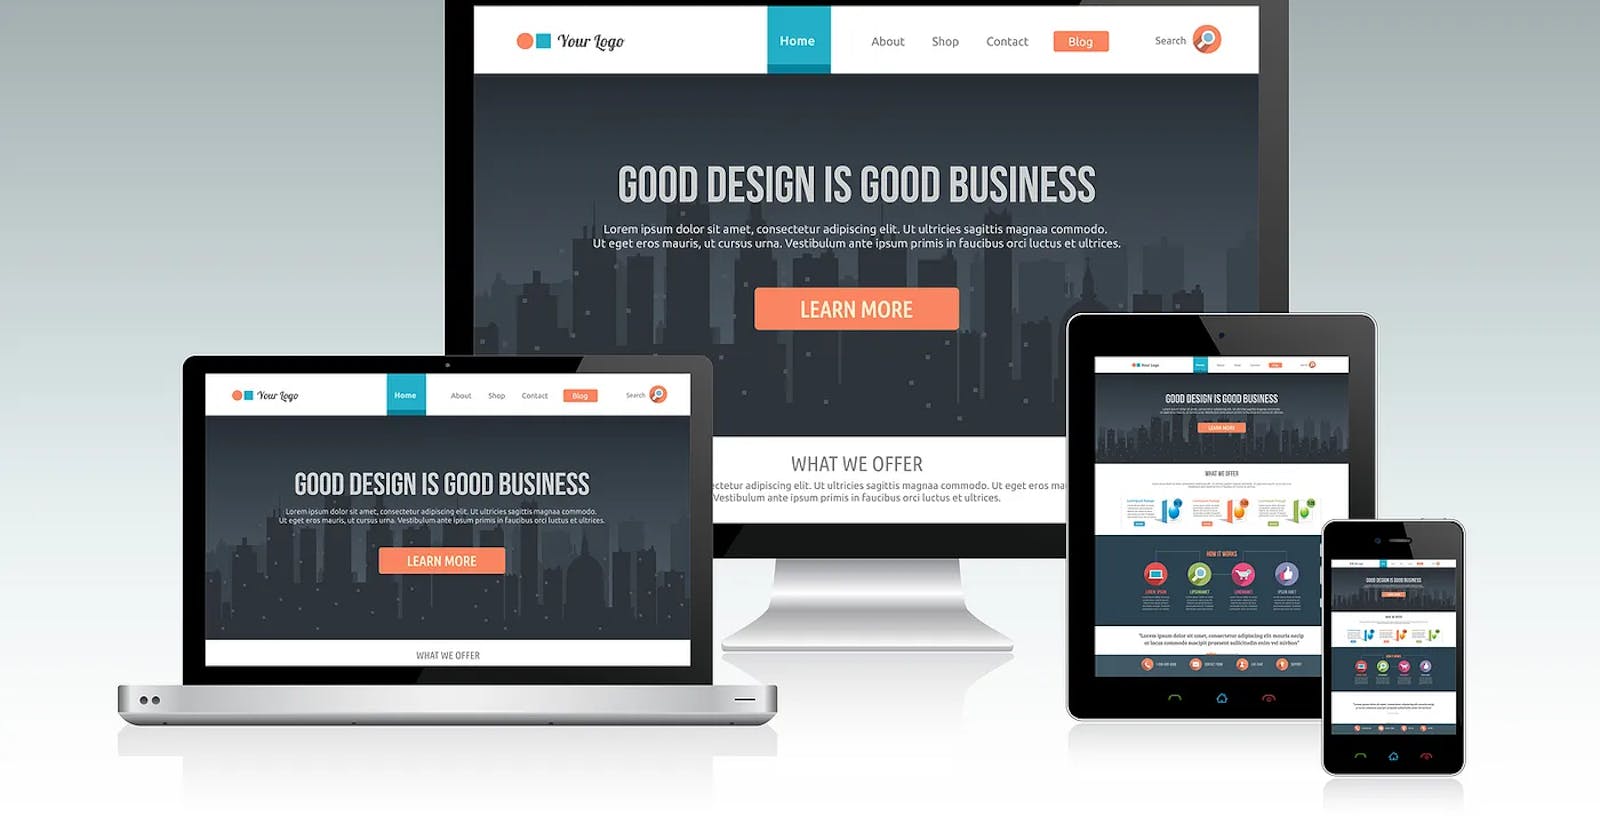 Responsive web design and how to create mobile-first websites